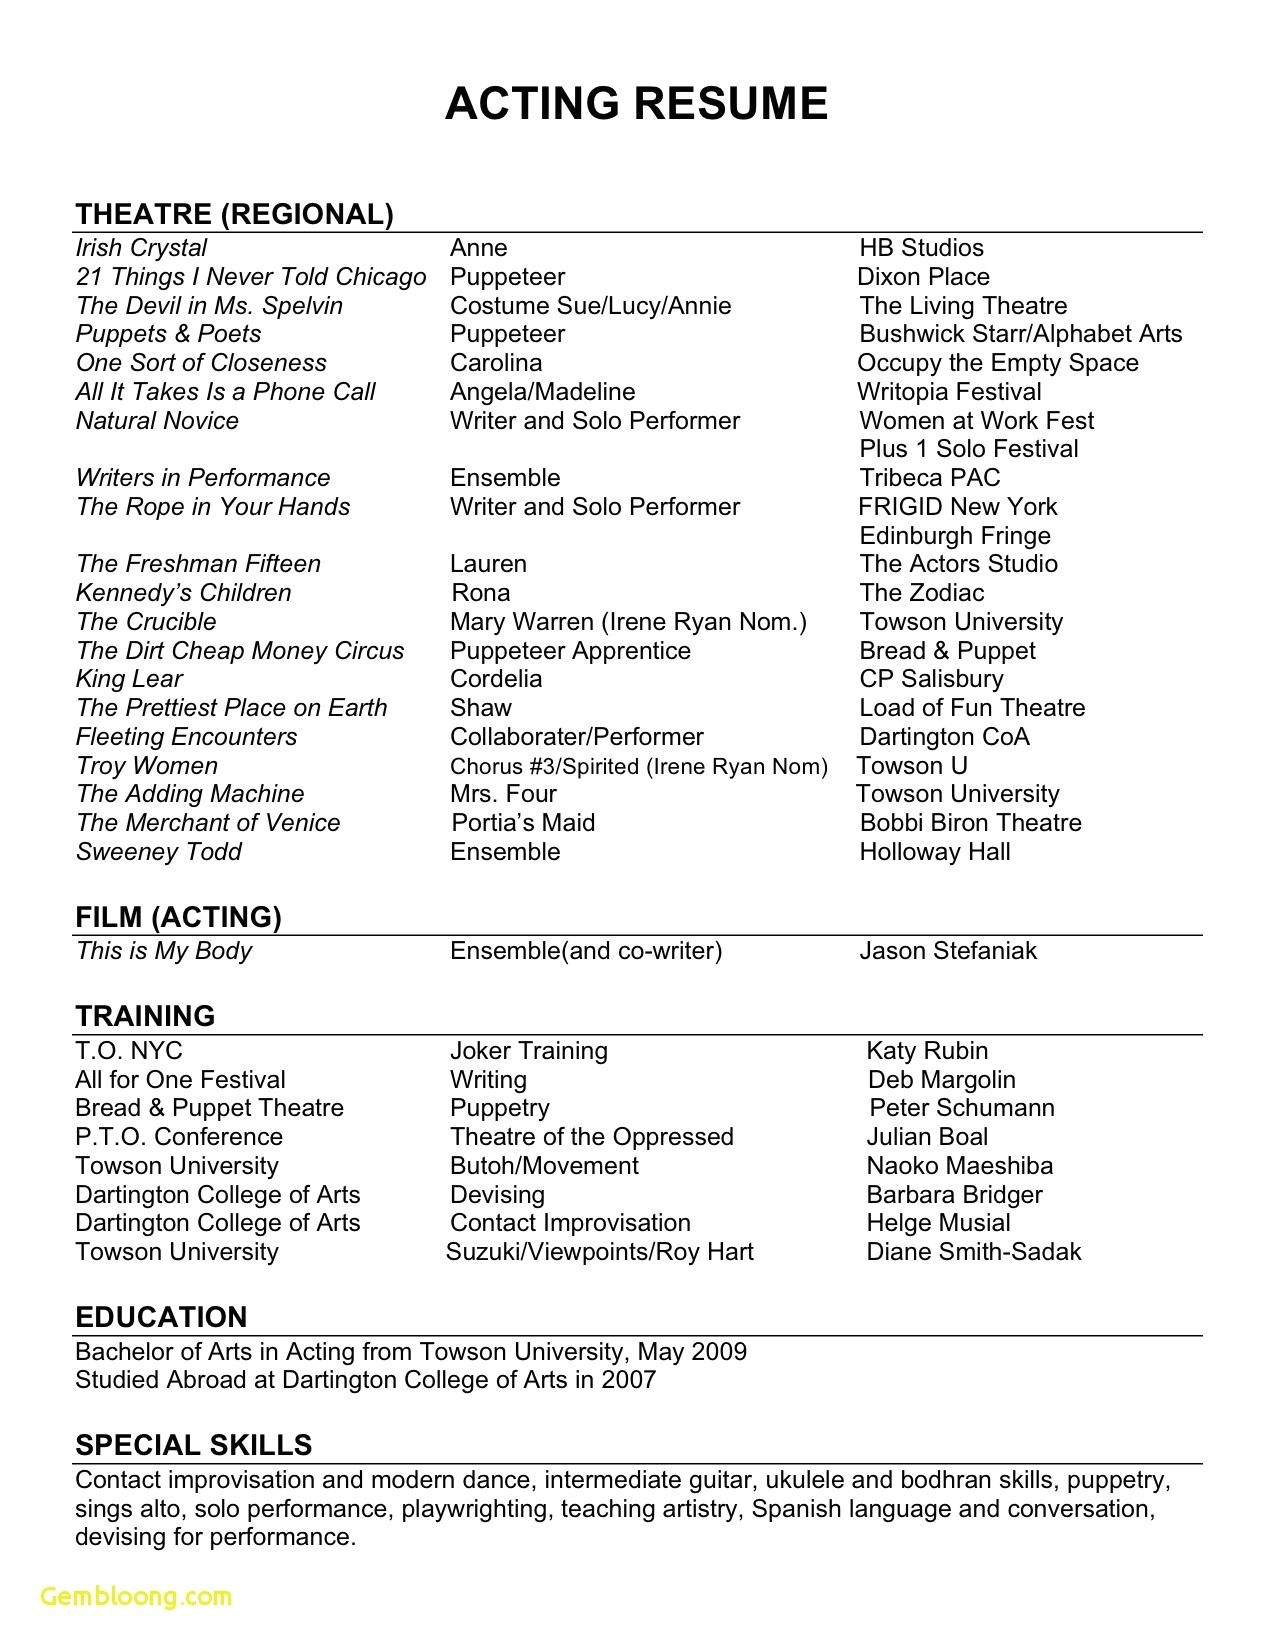 Acting Resume Template Resume Templates Theatre Resume Template Acting Acting Resume Sample